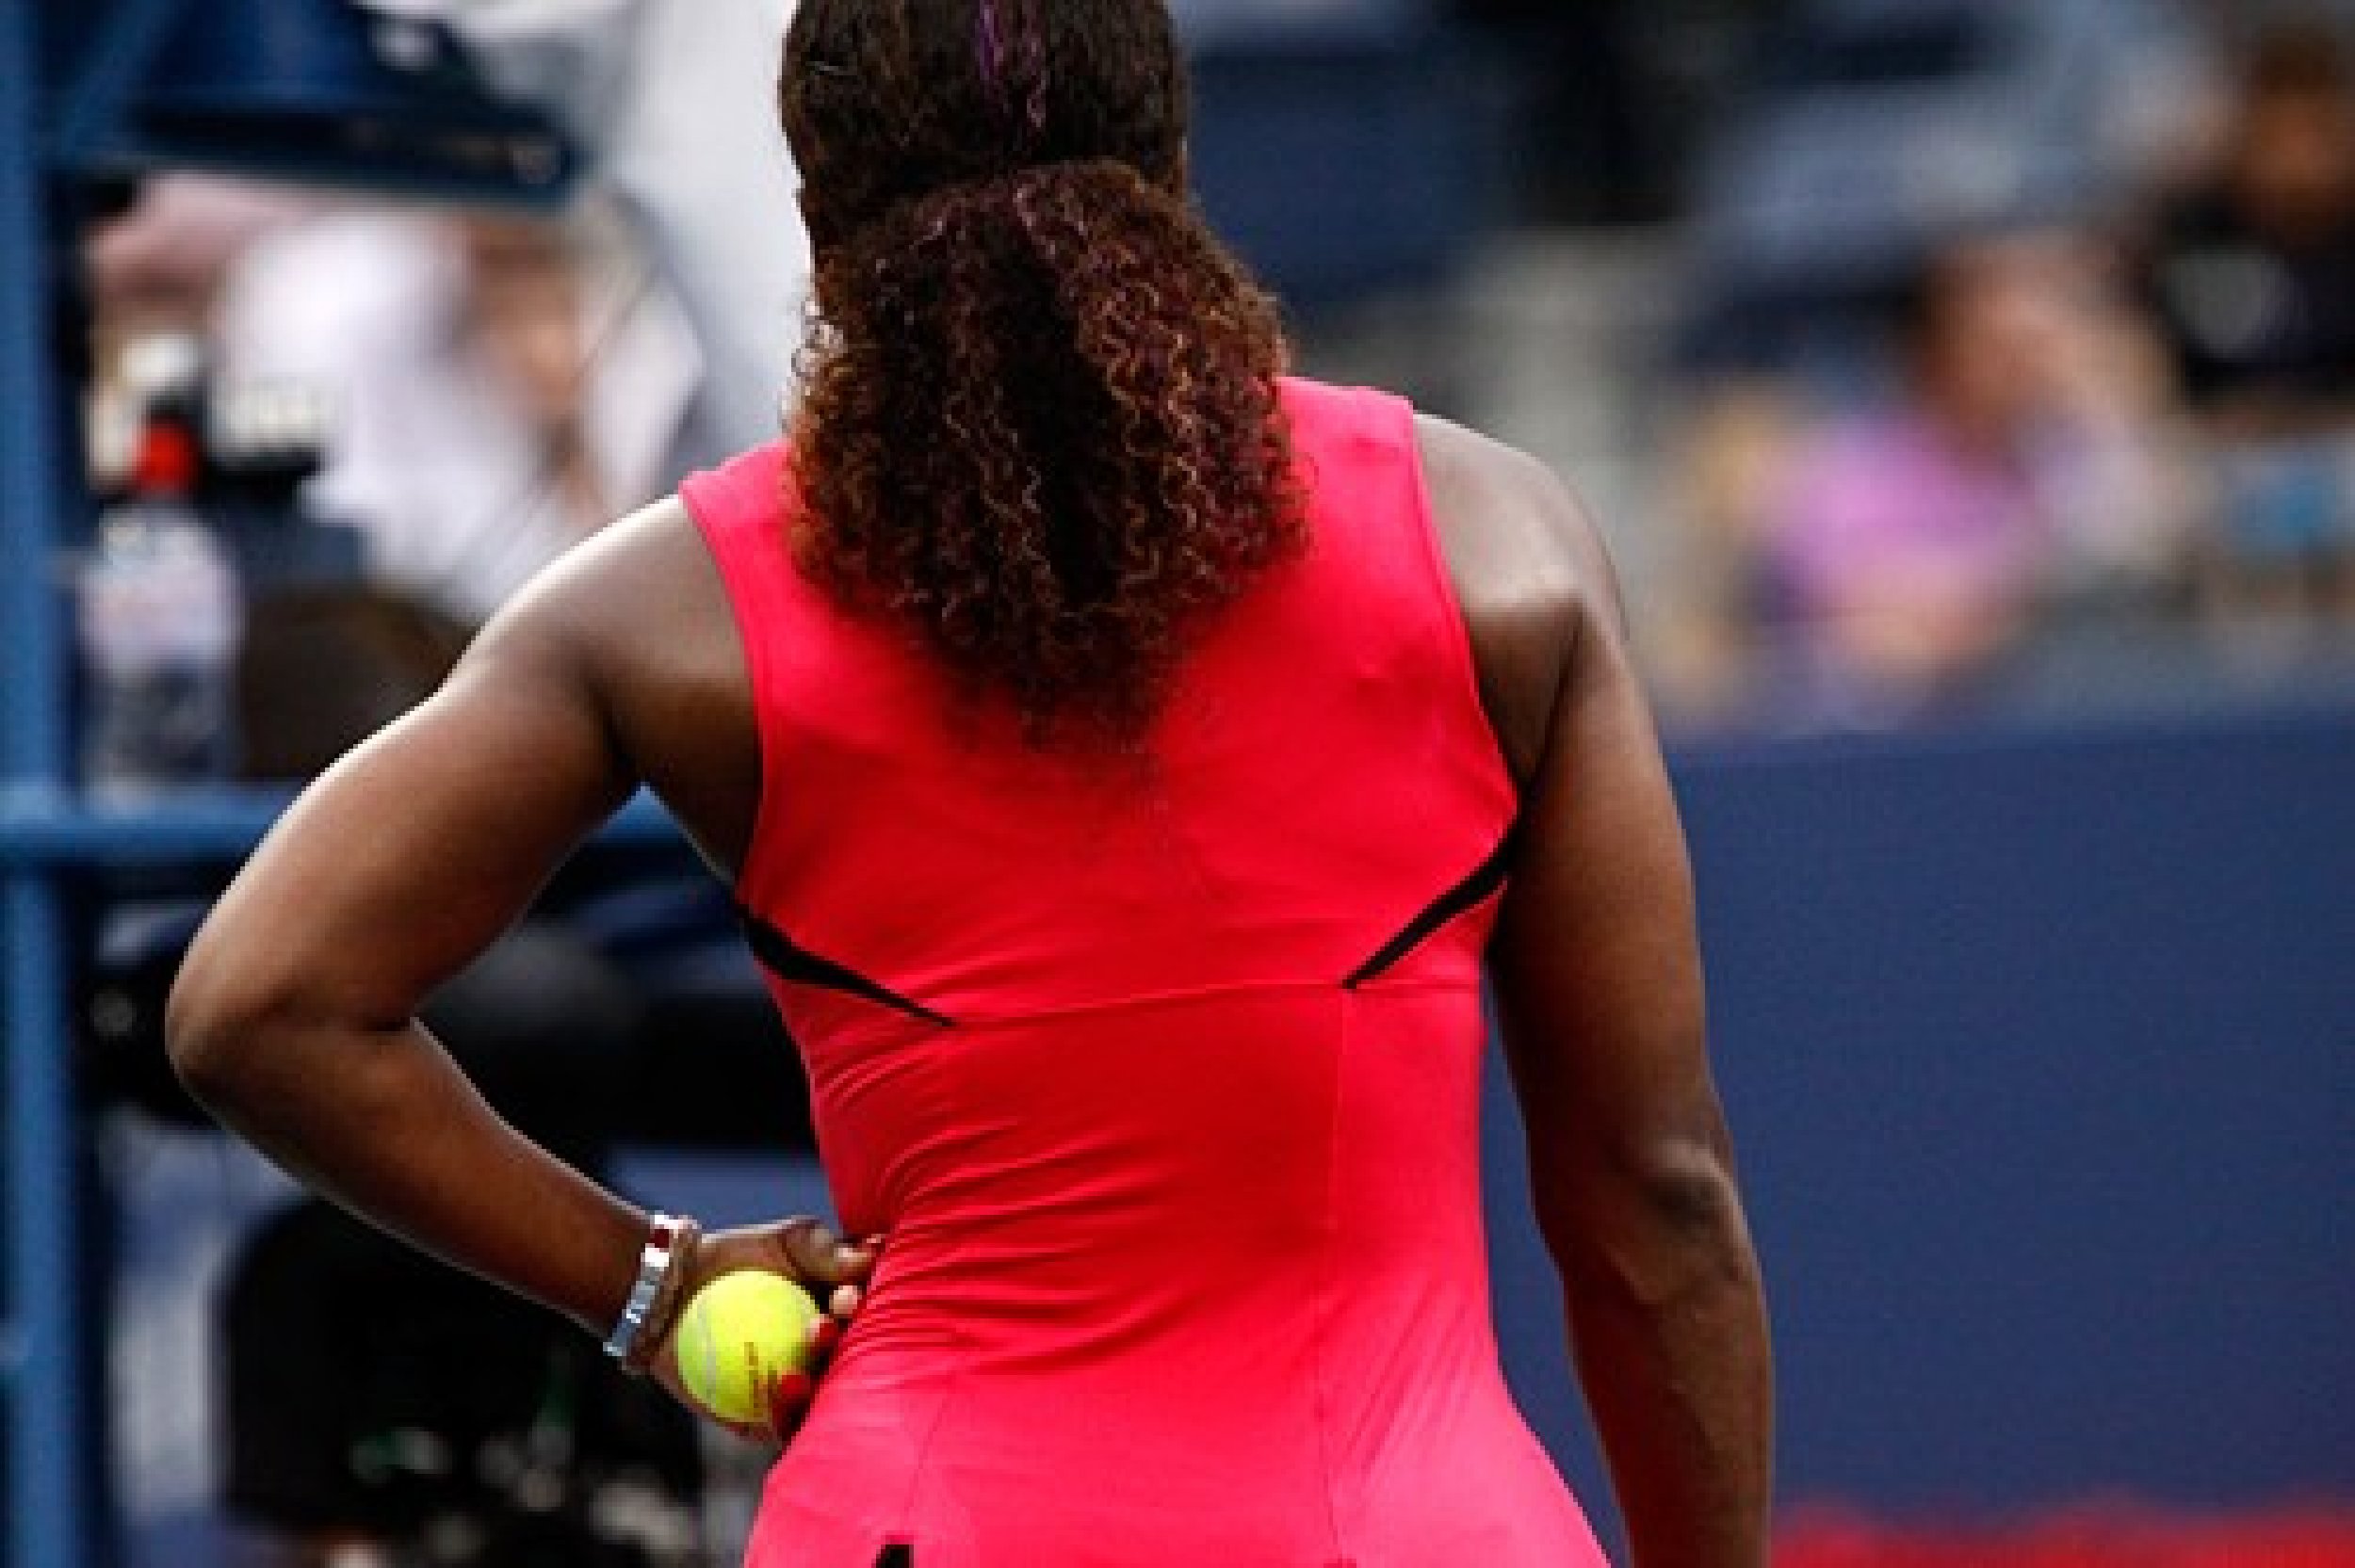 Serena Williams USA arguing with the chair umpire during the 2011 US Open Women039s Final against Samantha Stosur AUS